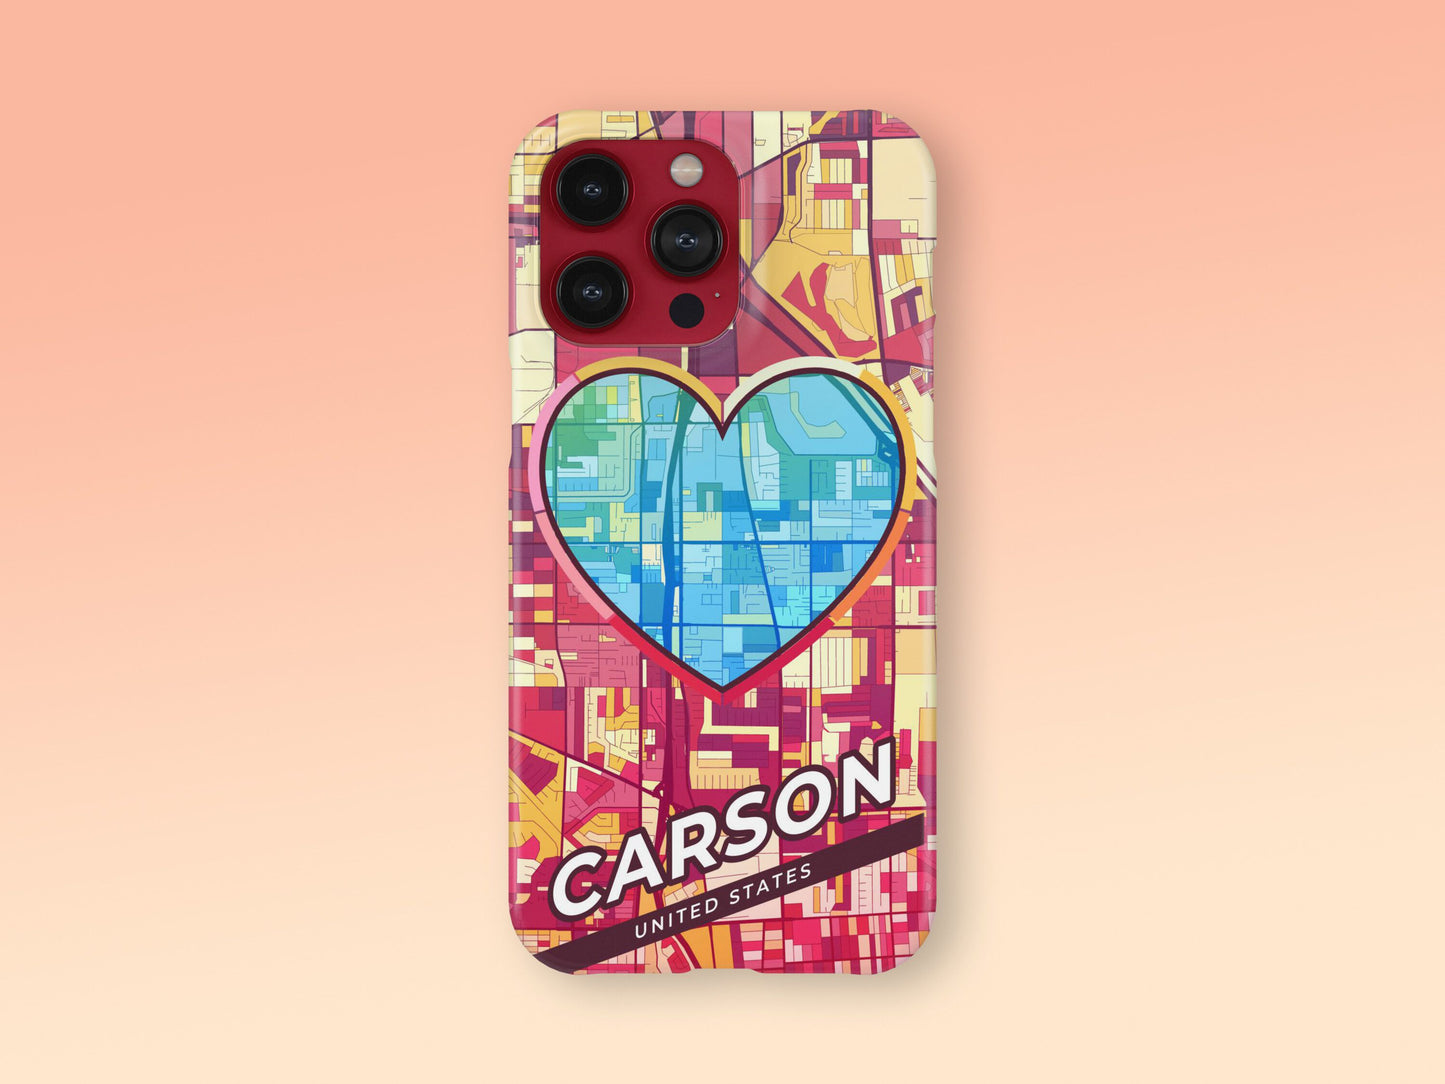 Carson California slim phone case with colorful icon. Birthday, wedding or housewarming gift. Couple match cases. 2